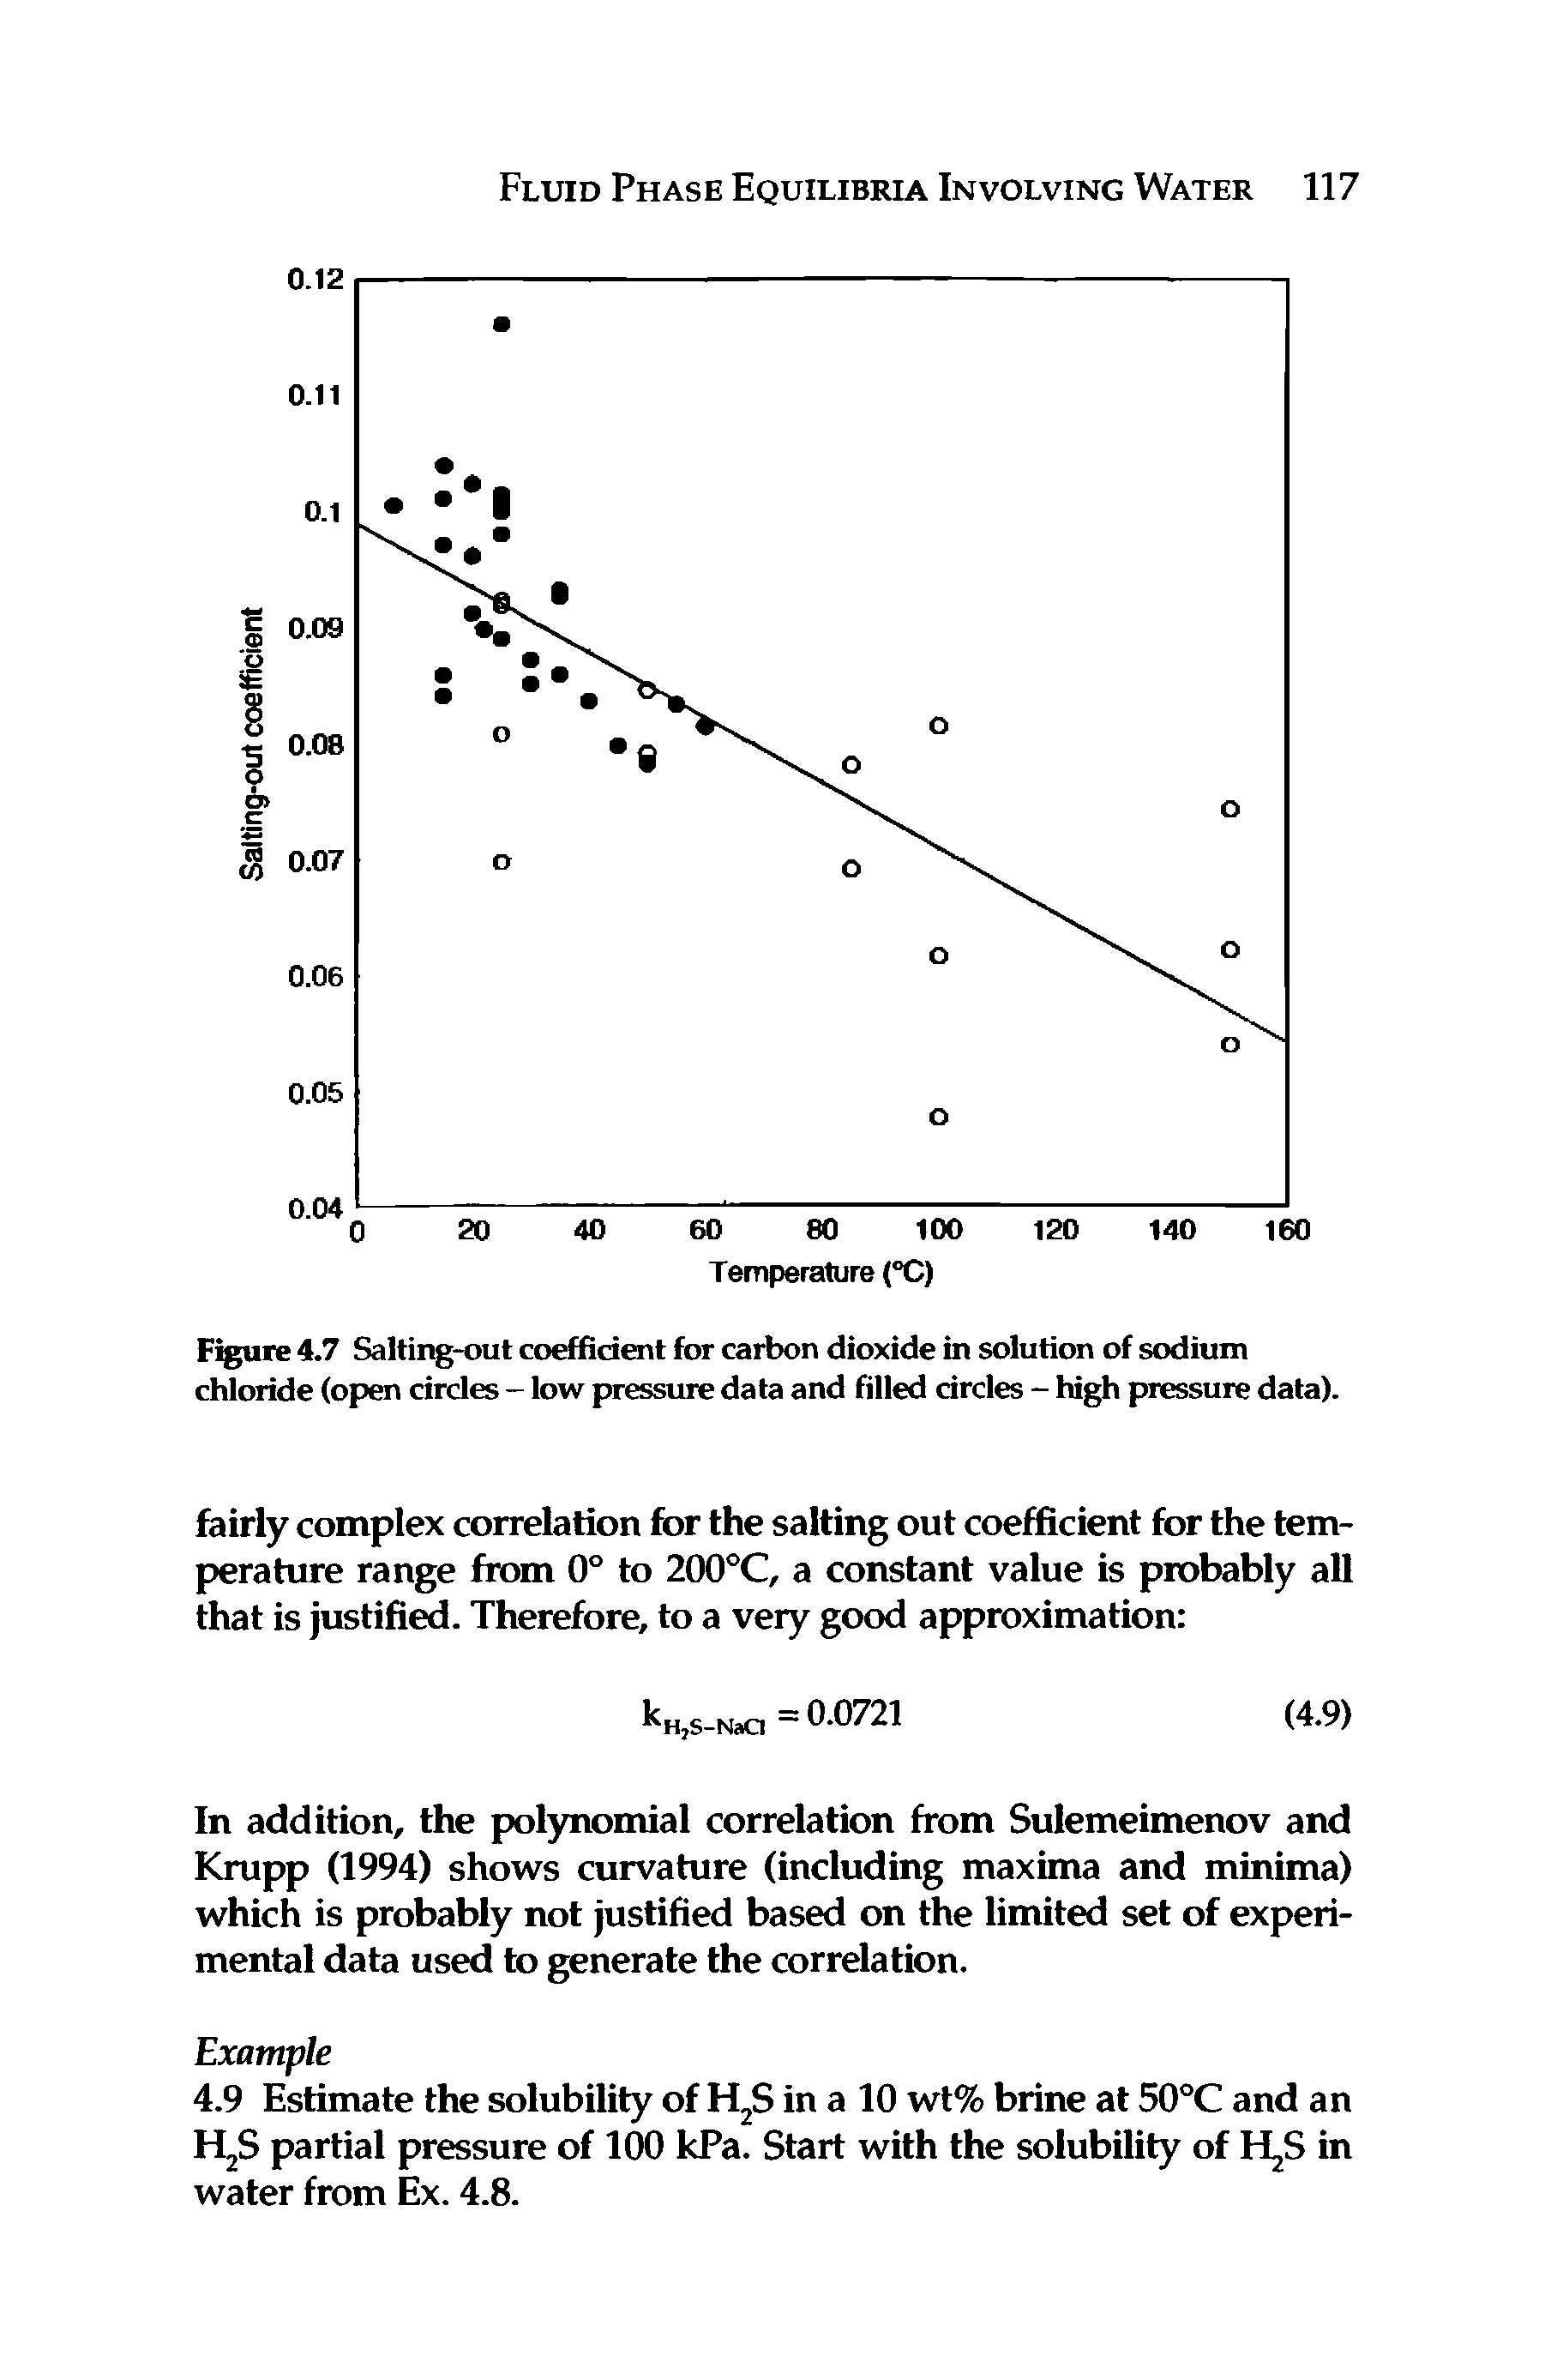 Figure 4.7 Salting-out coefficient for carbon dioxide in solution of sodium chloride (open circles - low pressure data and filled circles - high pressure data).